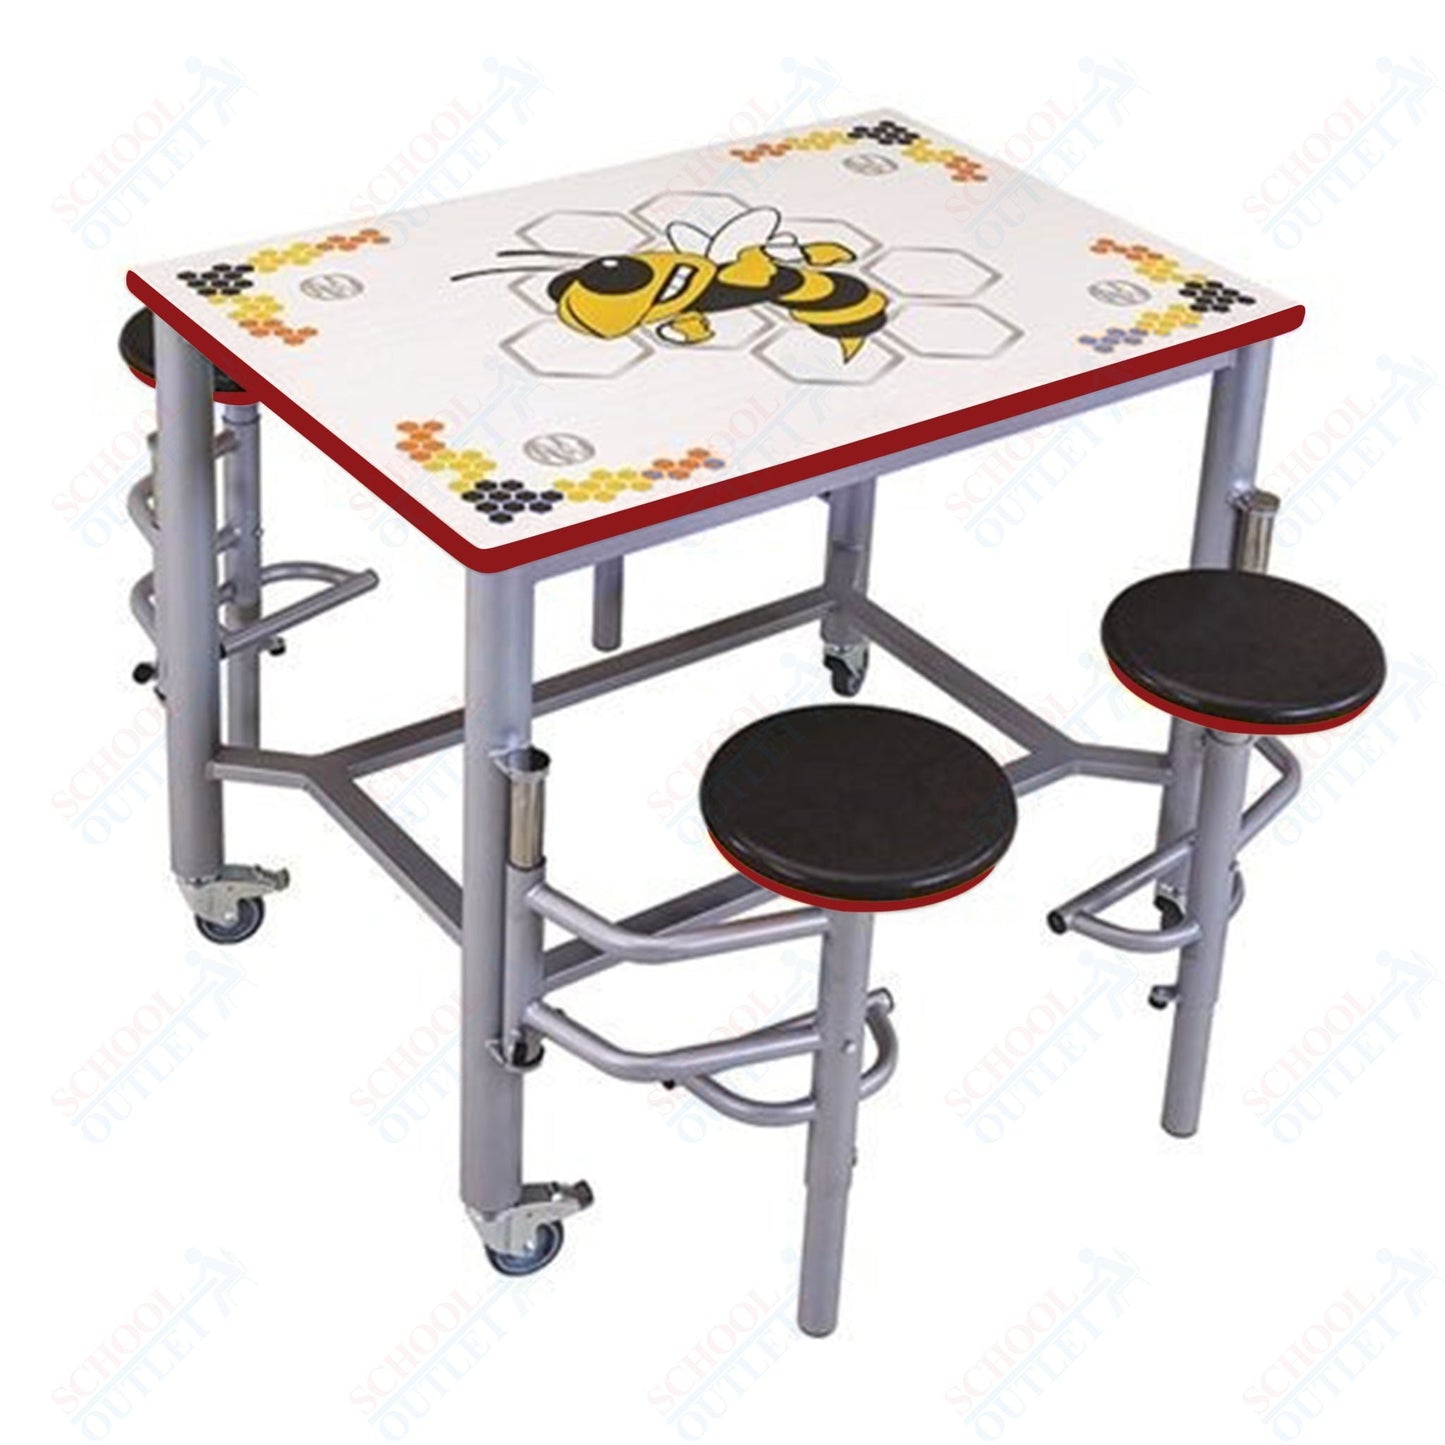 AmTab Mobile Stool Table - Group Collaboration High Table - 36"W x 52"L x 42"H - 4 Stools (AMT - MGST3652 - 42) - SchoolOutlet